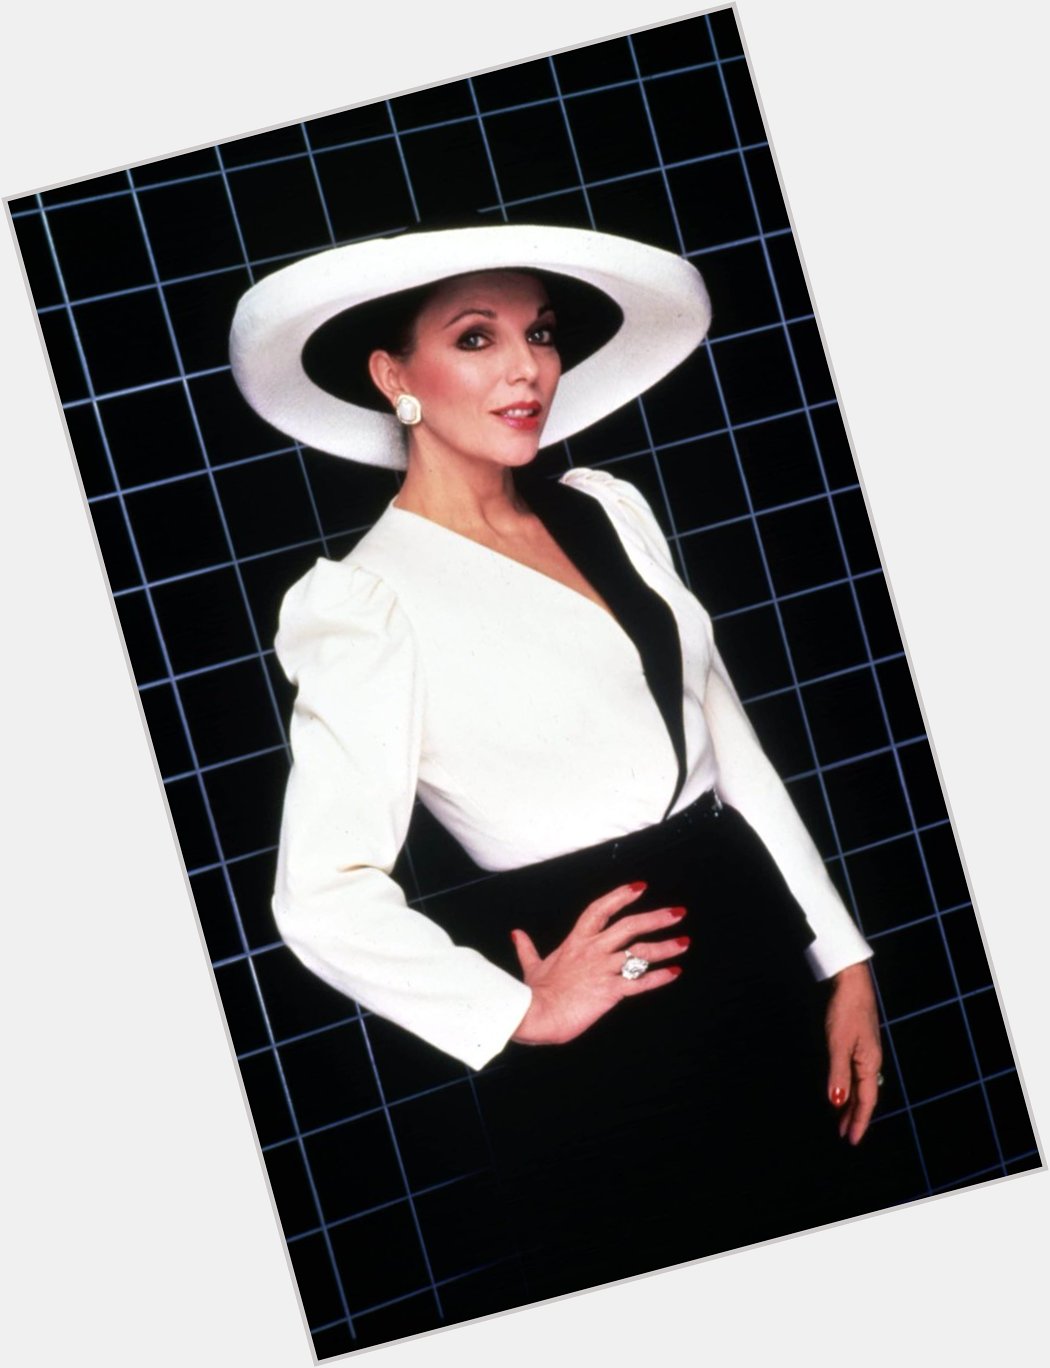 Happy birthday to Joan Collins! 
Dress accordingly for this style icon\s birthday. 